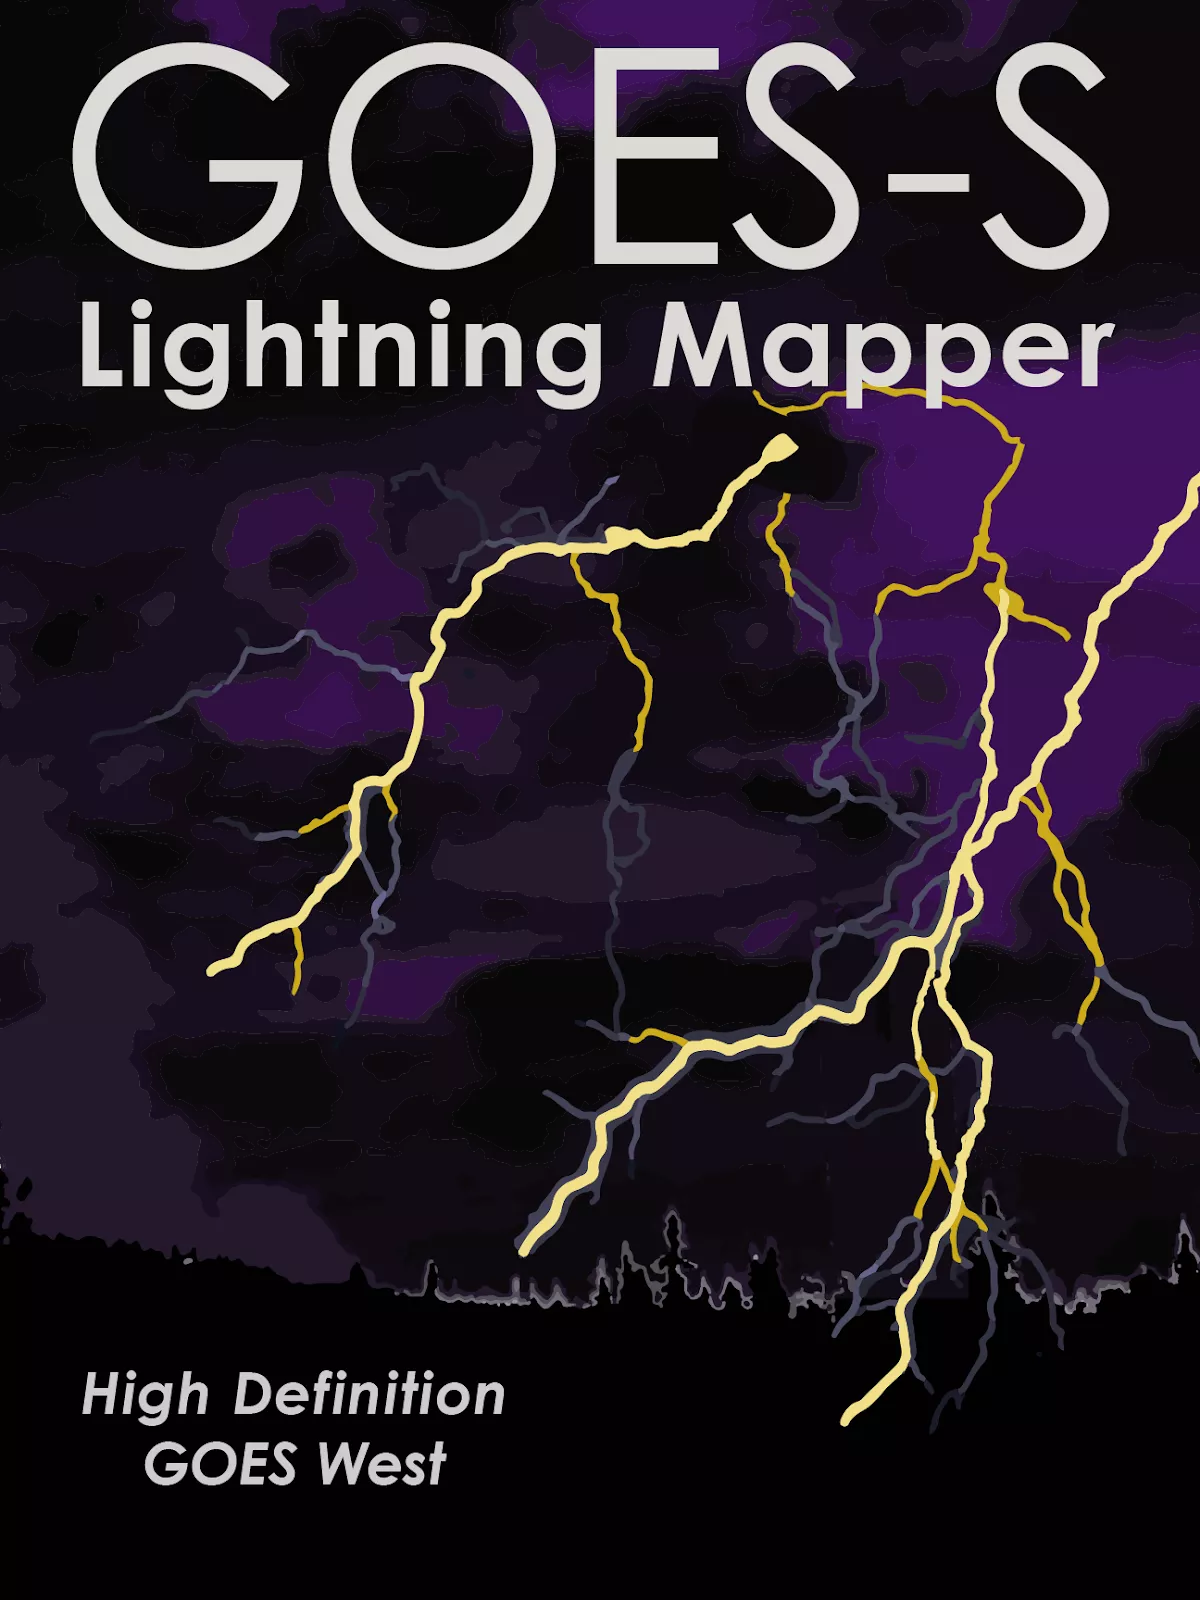 GOES-S promotional image, with "Lightning Mapper" outlined and "High Definition GOES West" at the bottom. Lightning is in the background. 